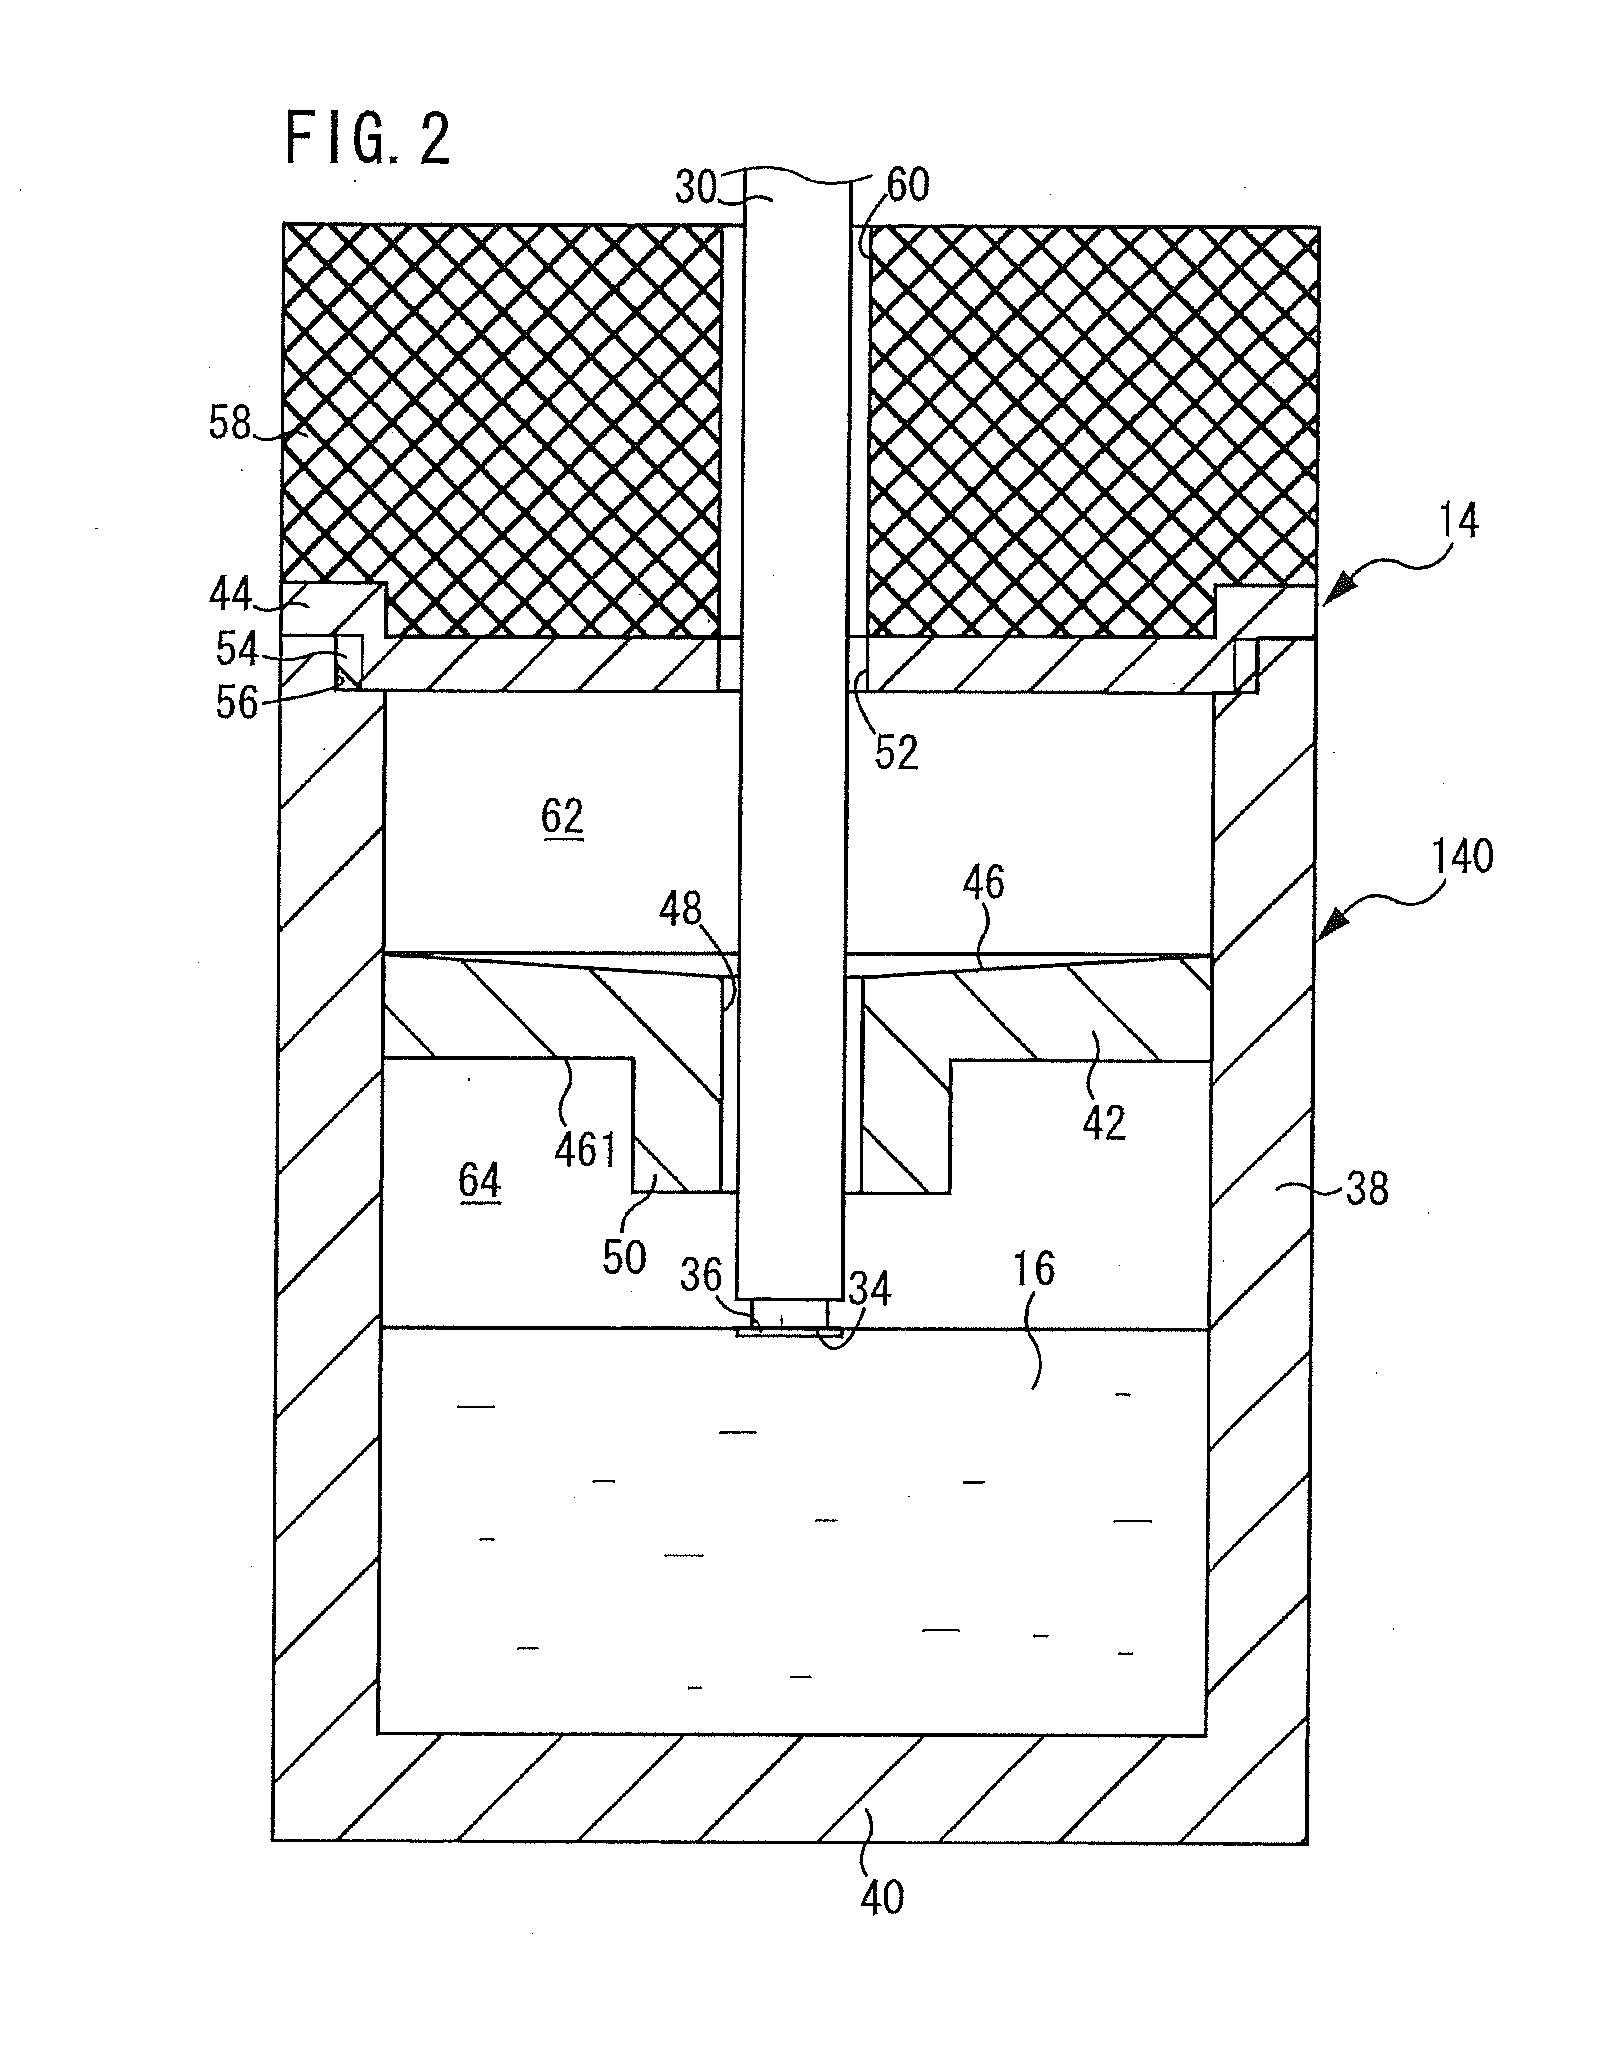 PRODUCTION APPARATUS OF SiC SINGLE CRYSTAL BY SOLUTION GROWTH METHOD, METHOD FOR PRODUCING SiC SINGLE CRYSTAL USING THE PRODUCTION APPARATUS, AND CRUCIBLE USED IN THE PRODUCTION APPARATUS